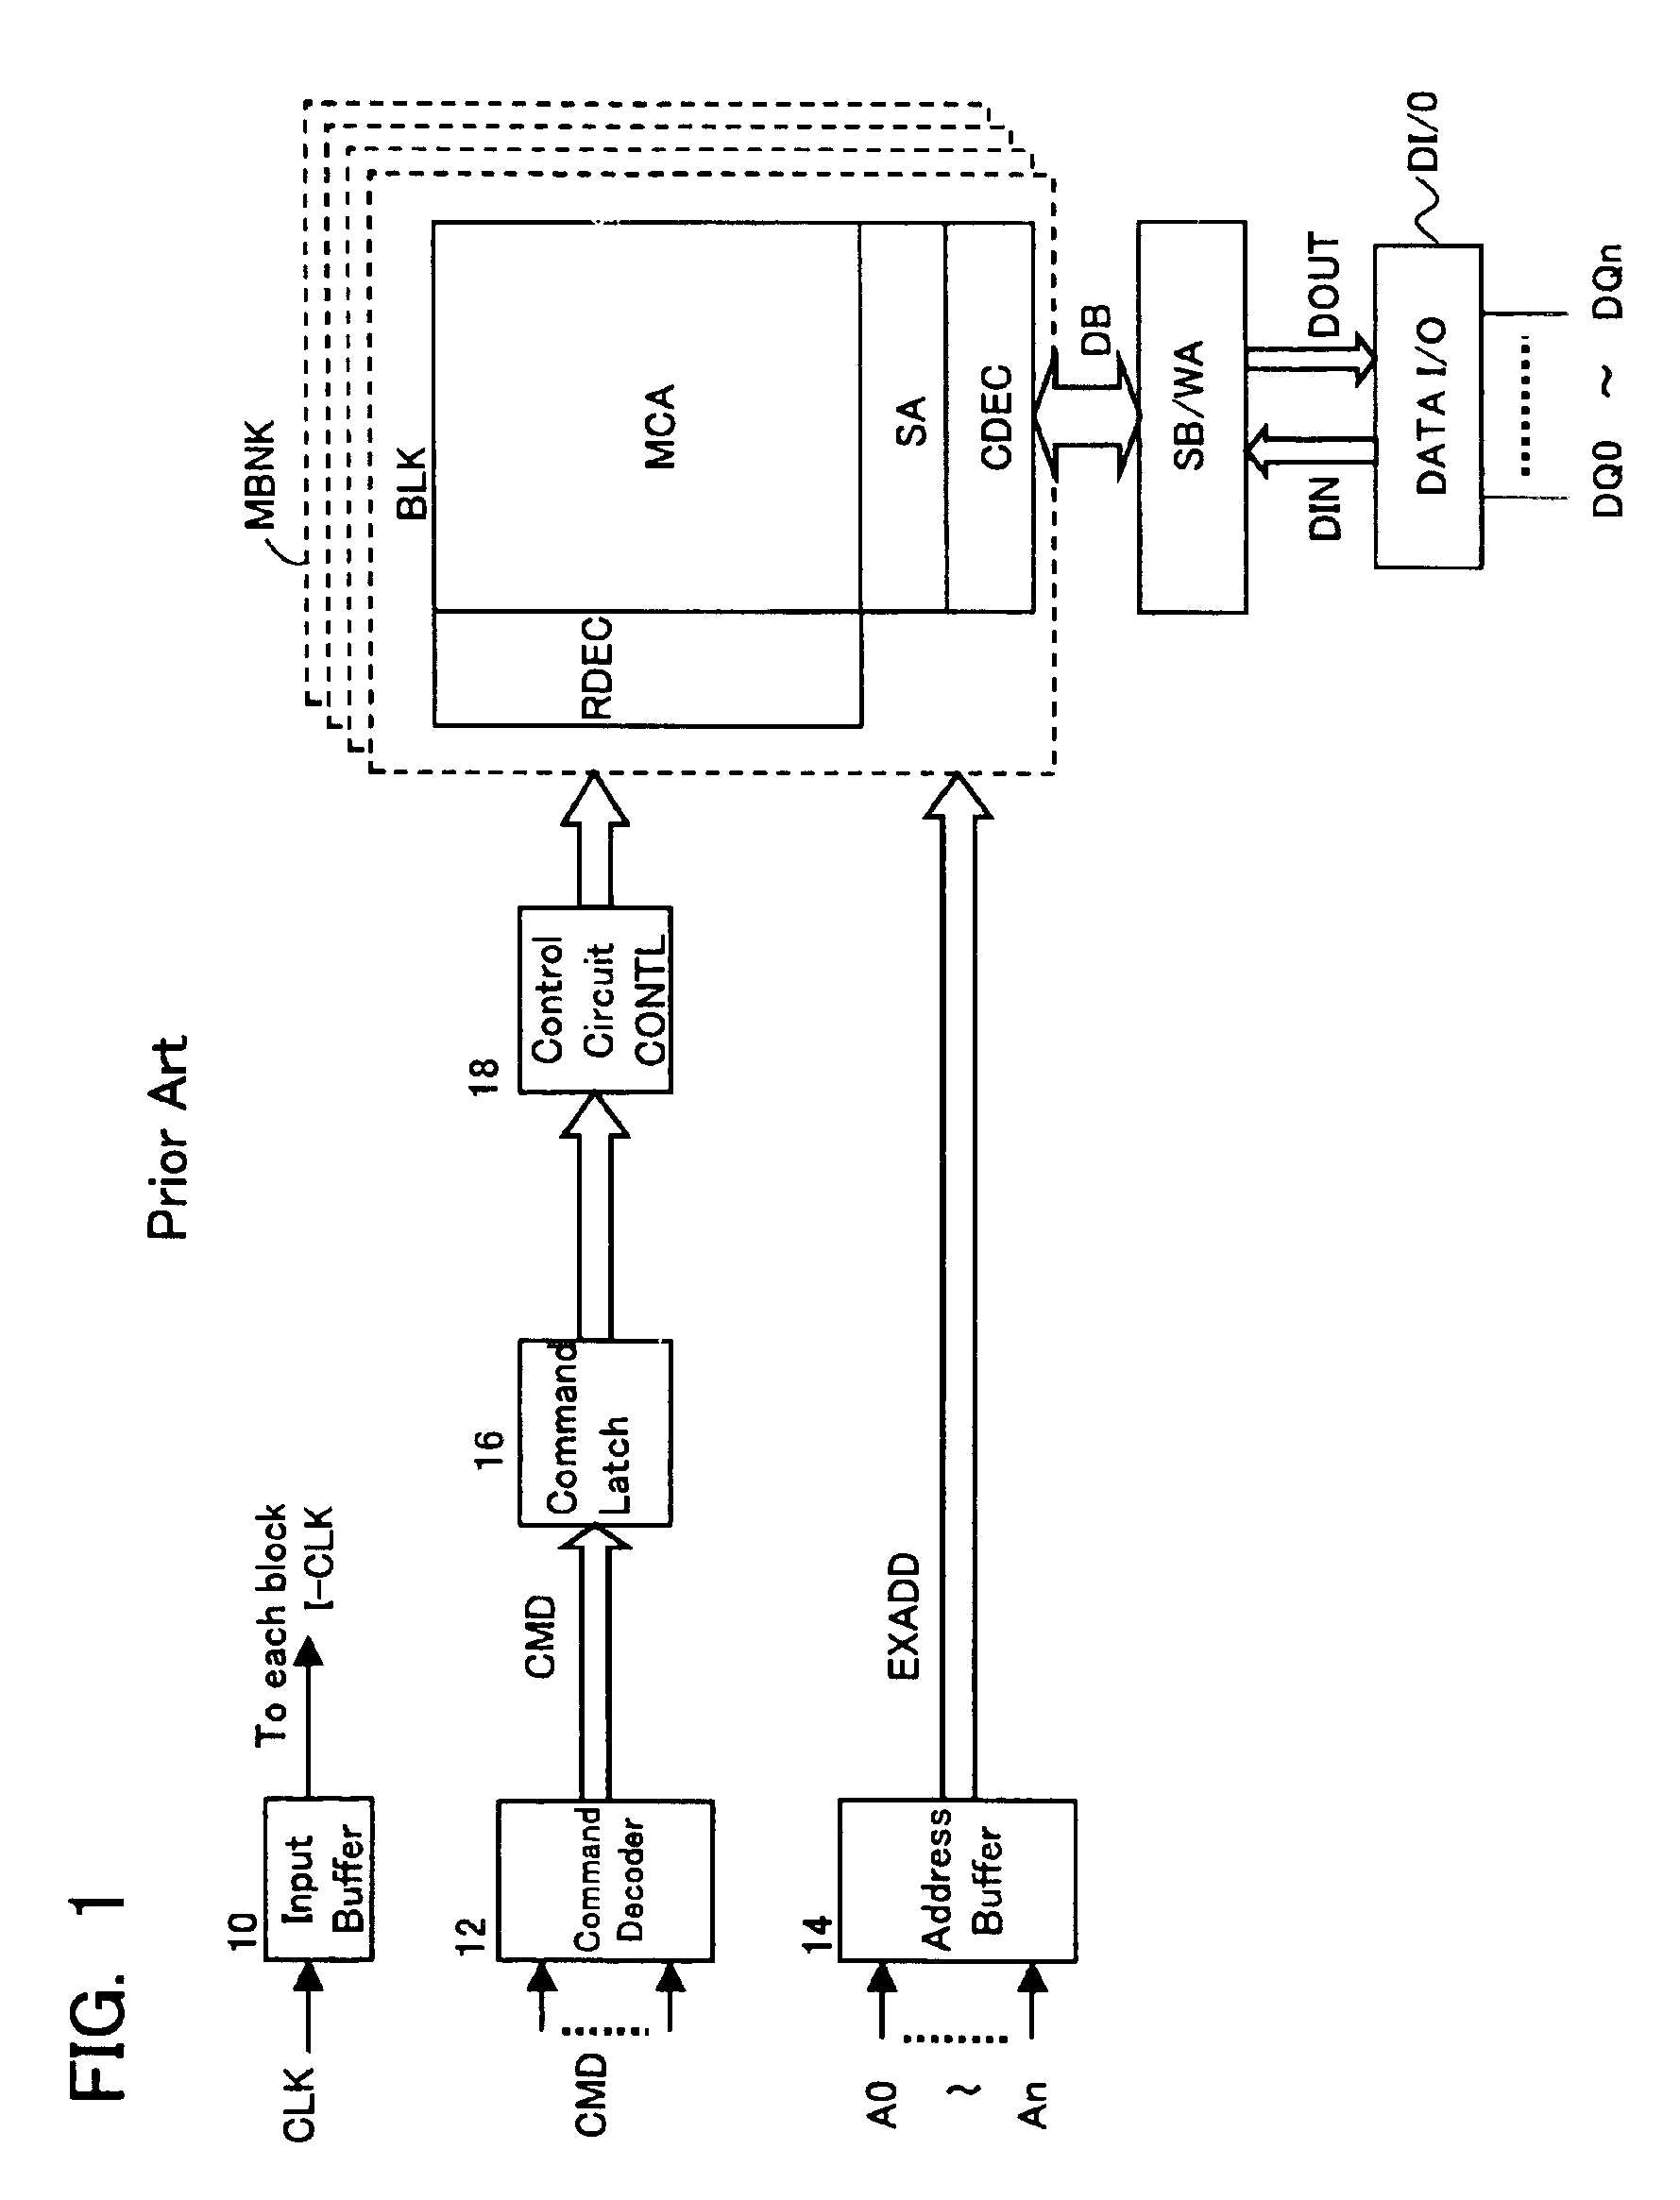 Self-test circuit and memory device incorporating it